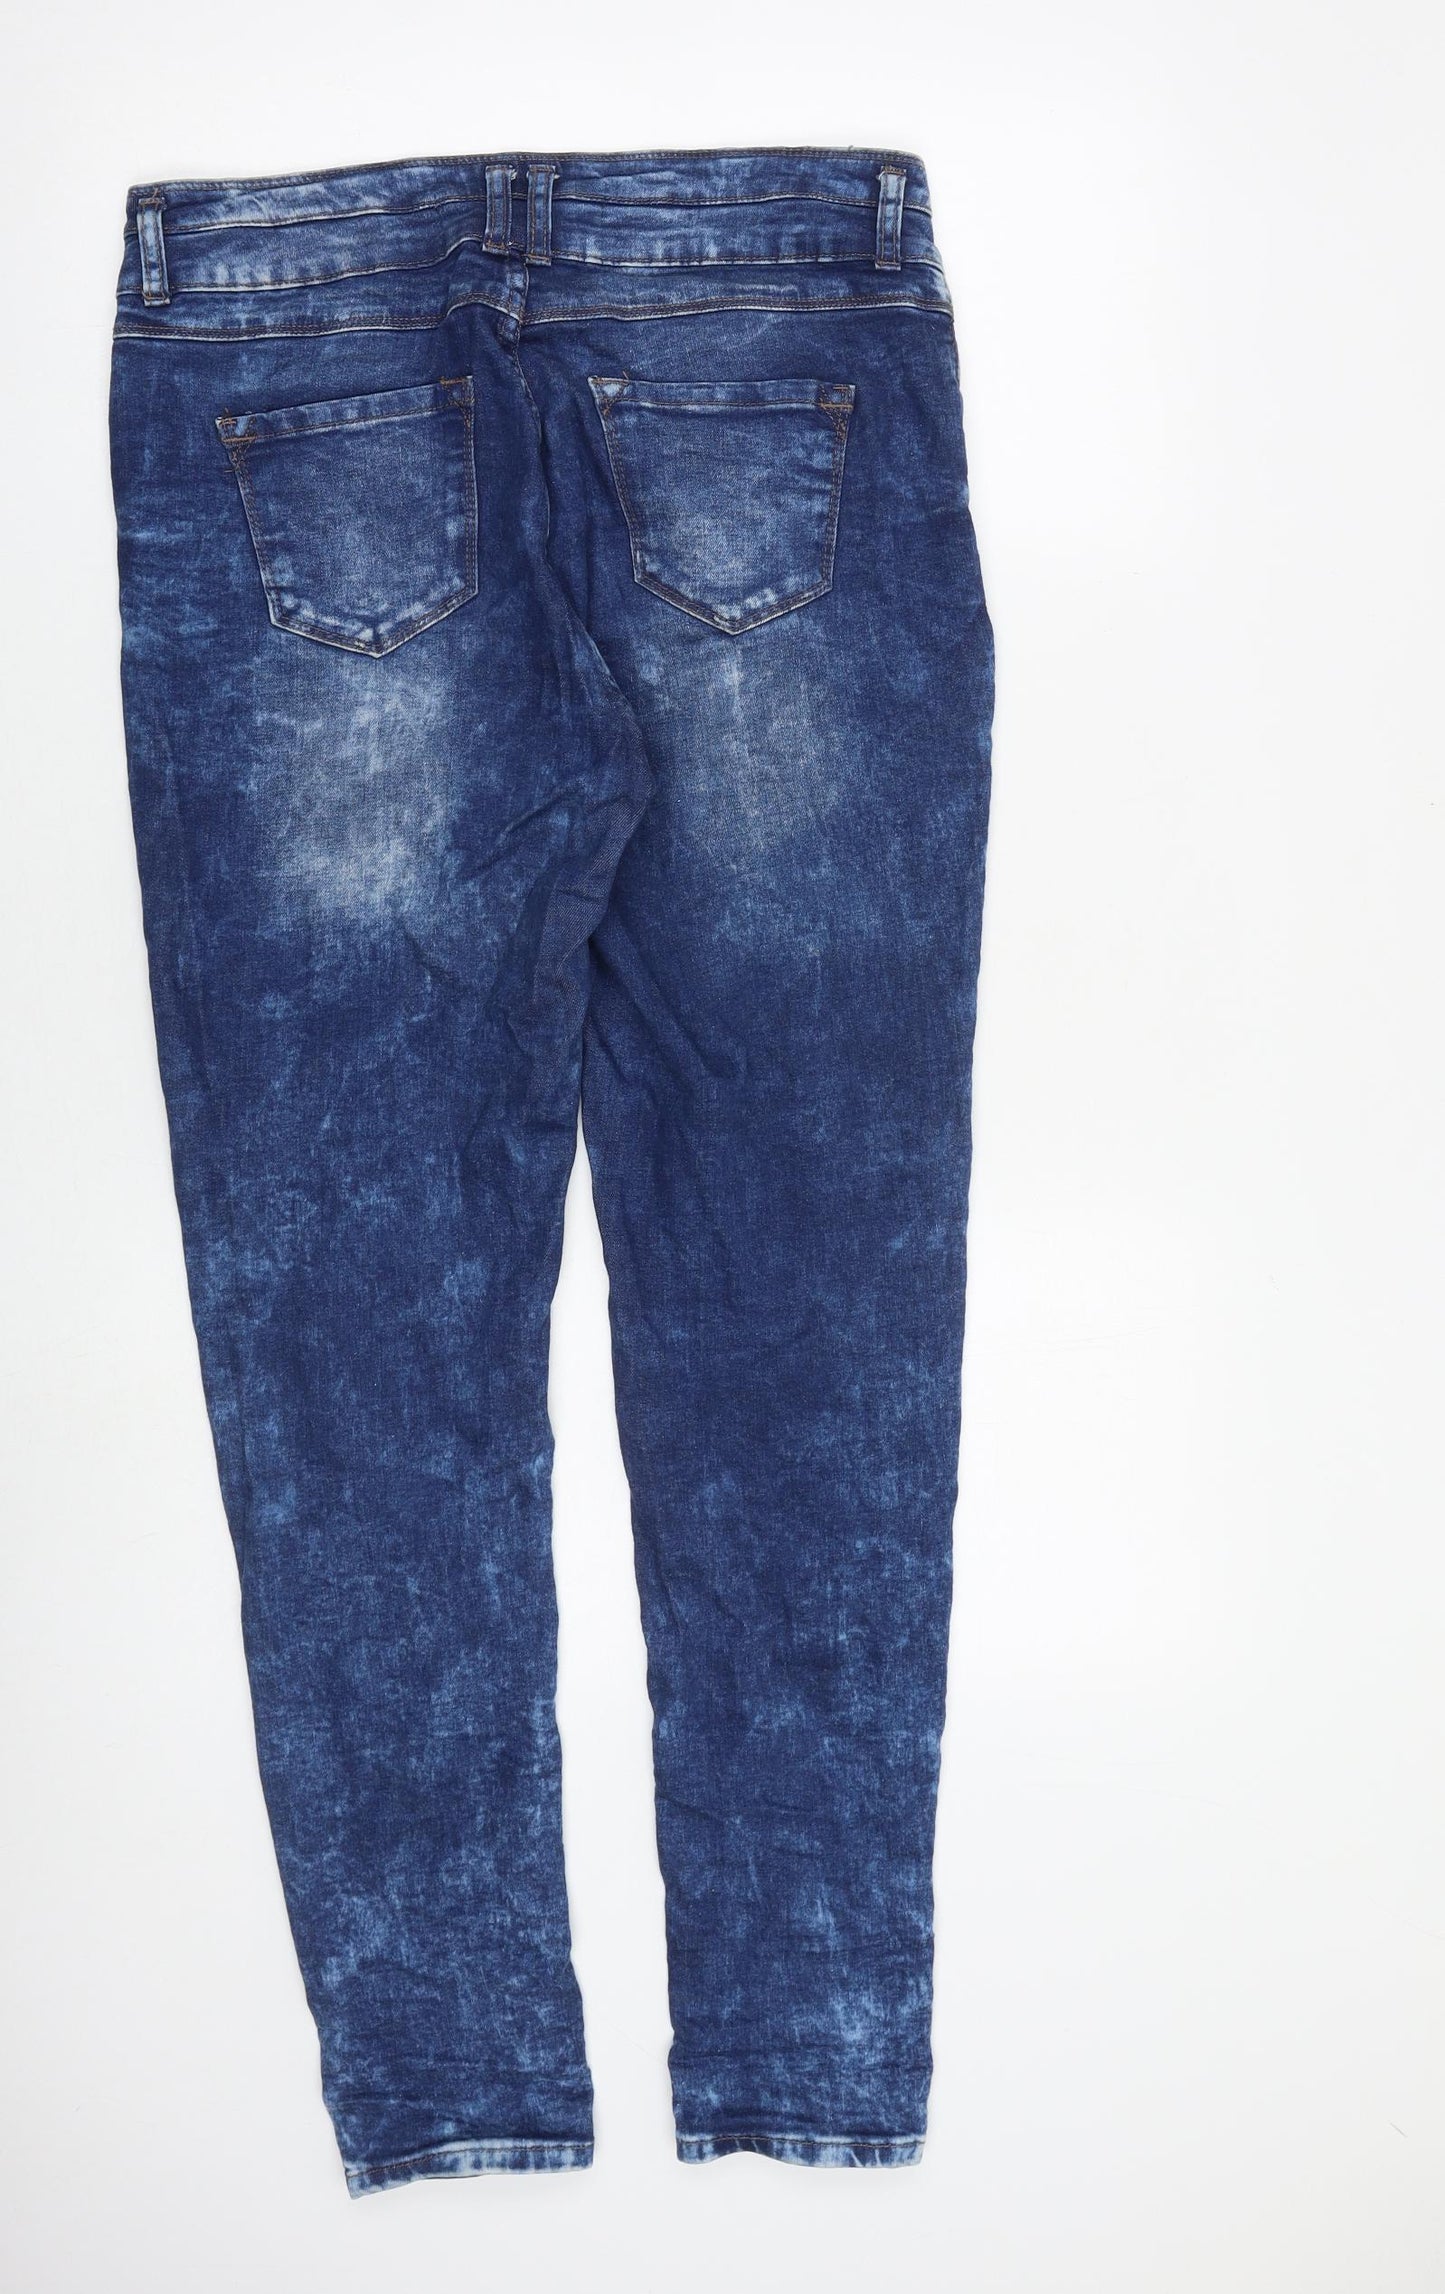 New Look Womens Blue Cotton Skinny Jeans Size 14 L31 in Slim Zip - Acid Wash